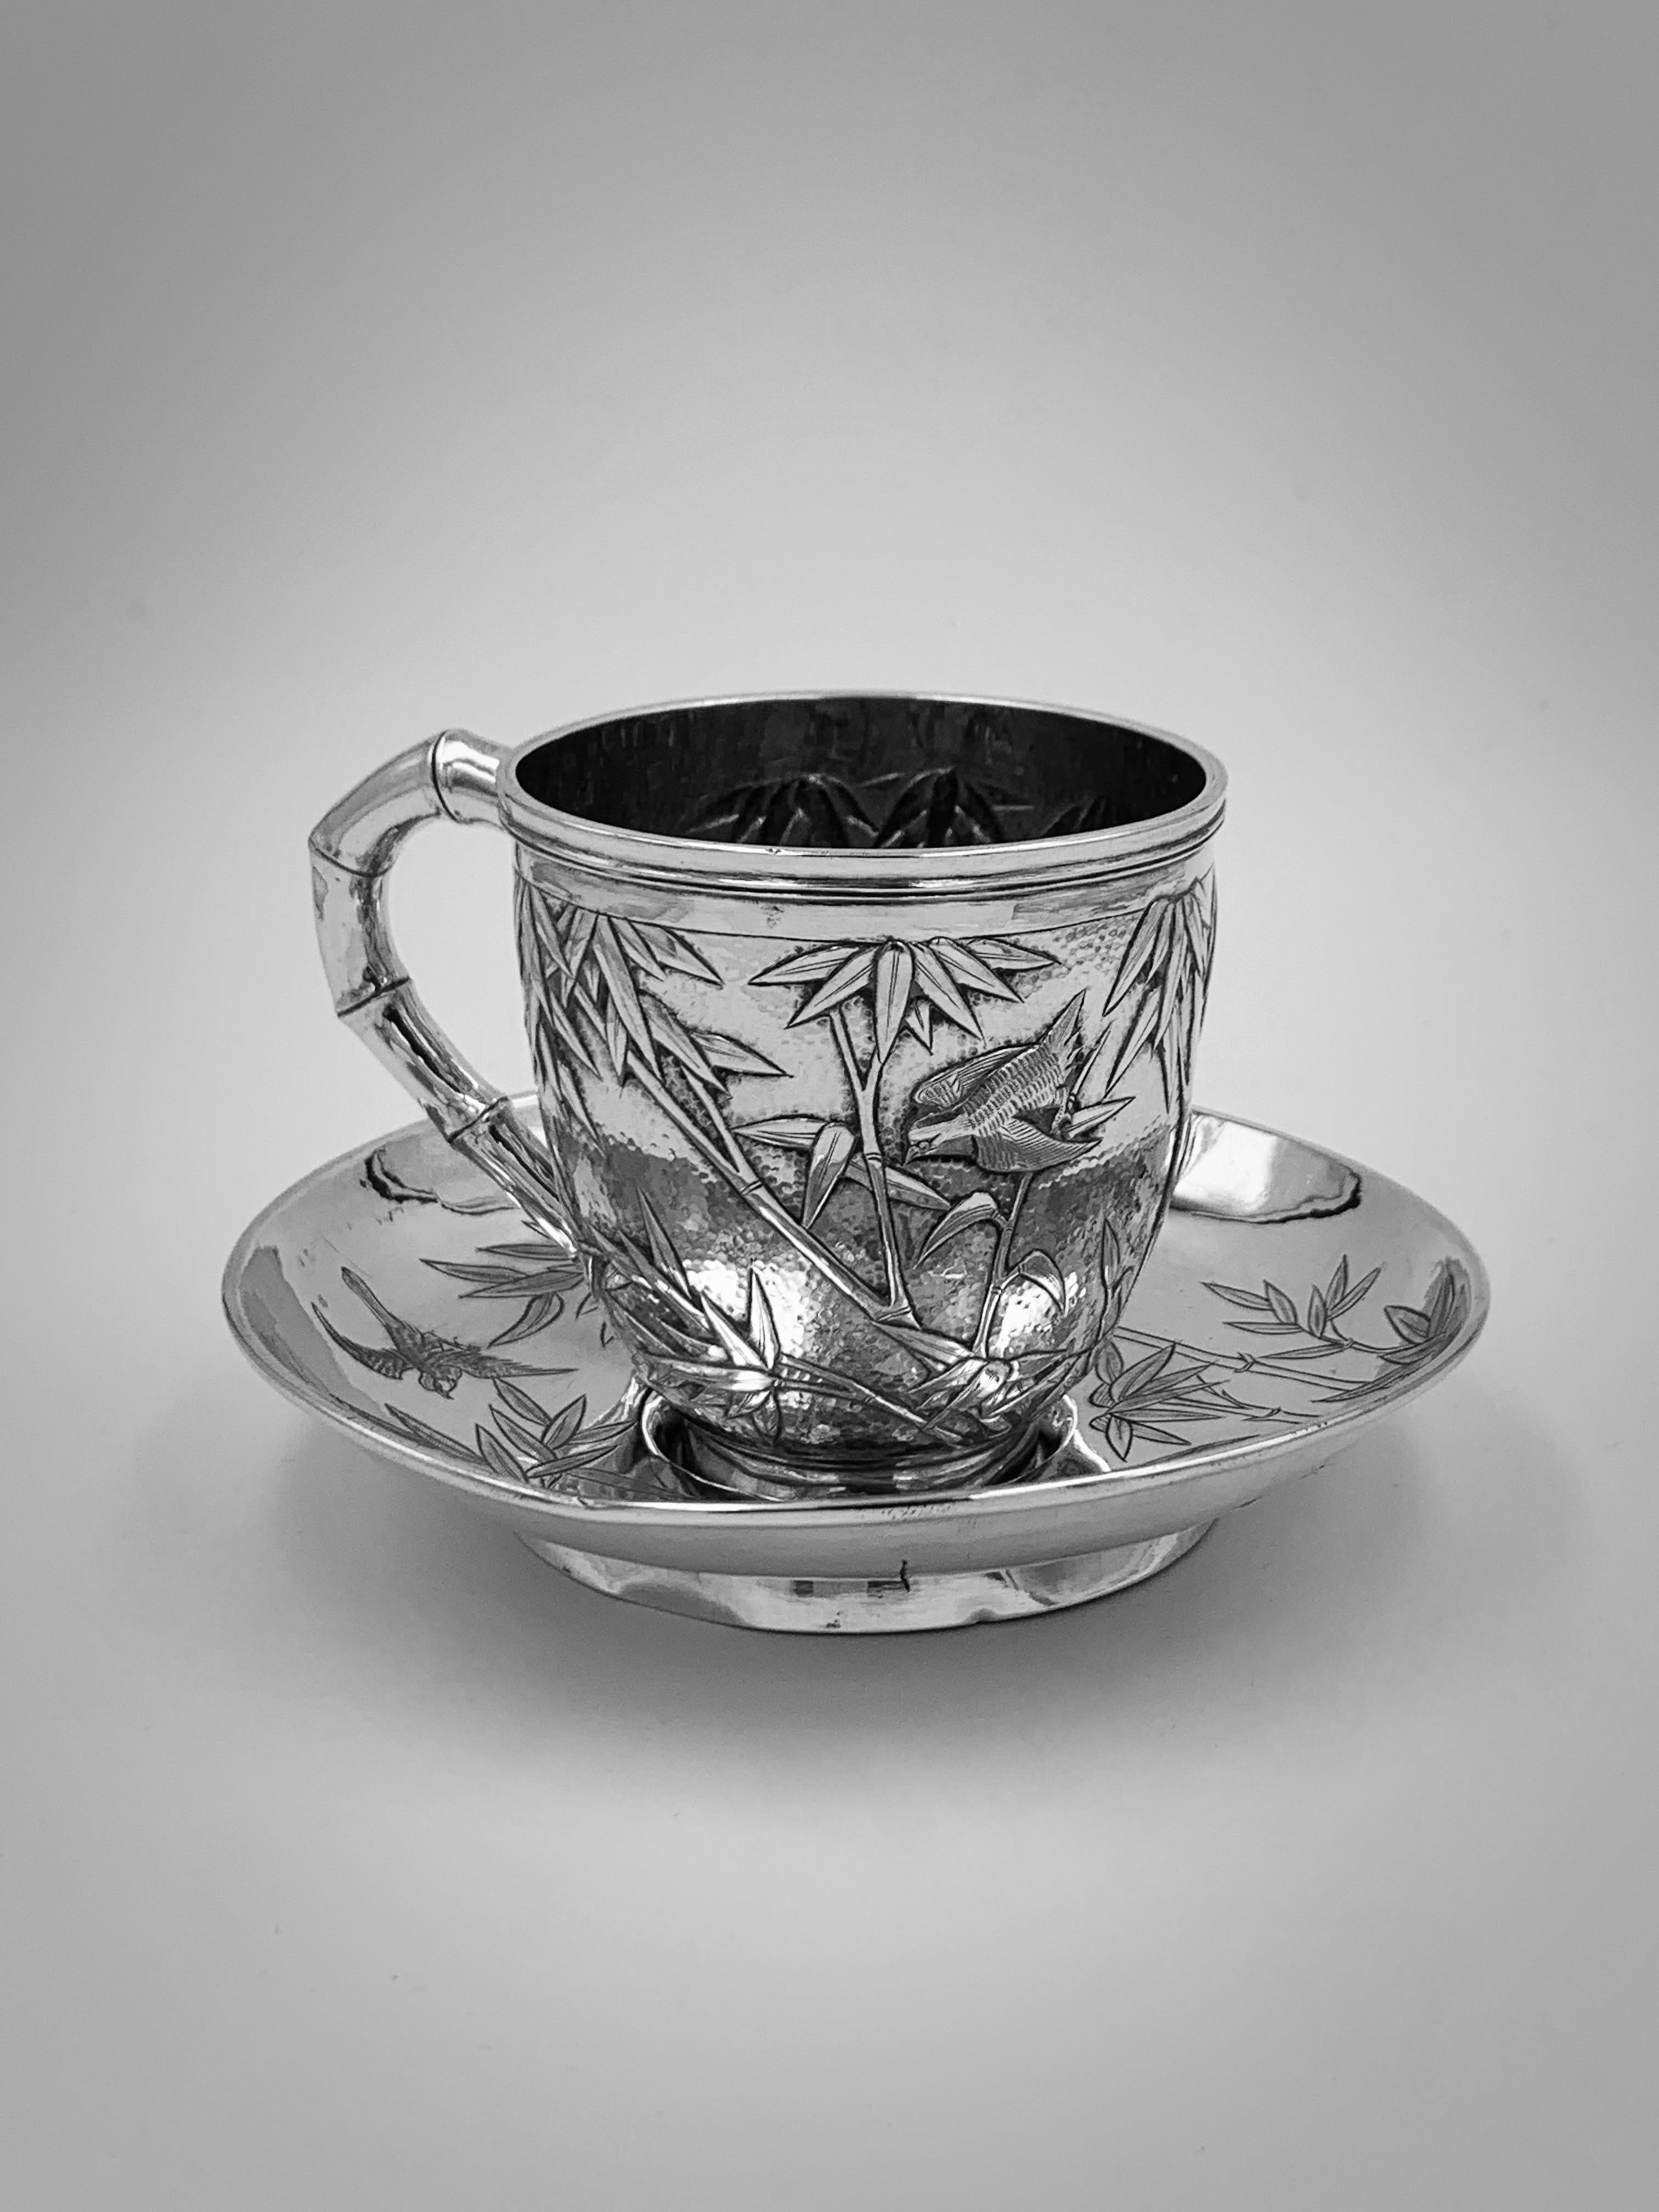 A Chinese Export Silver Tea Cup and Saucer made in Hong Kong around 1900. The cup embossed and chased with birds and bamboo against a matte background, with a single vacant shield-shape cartouche and a bamboo-form handle. The saucer is engraved with